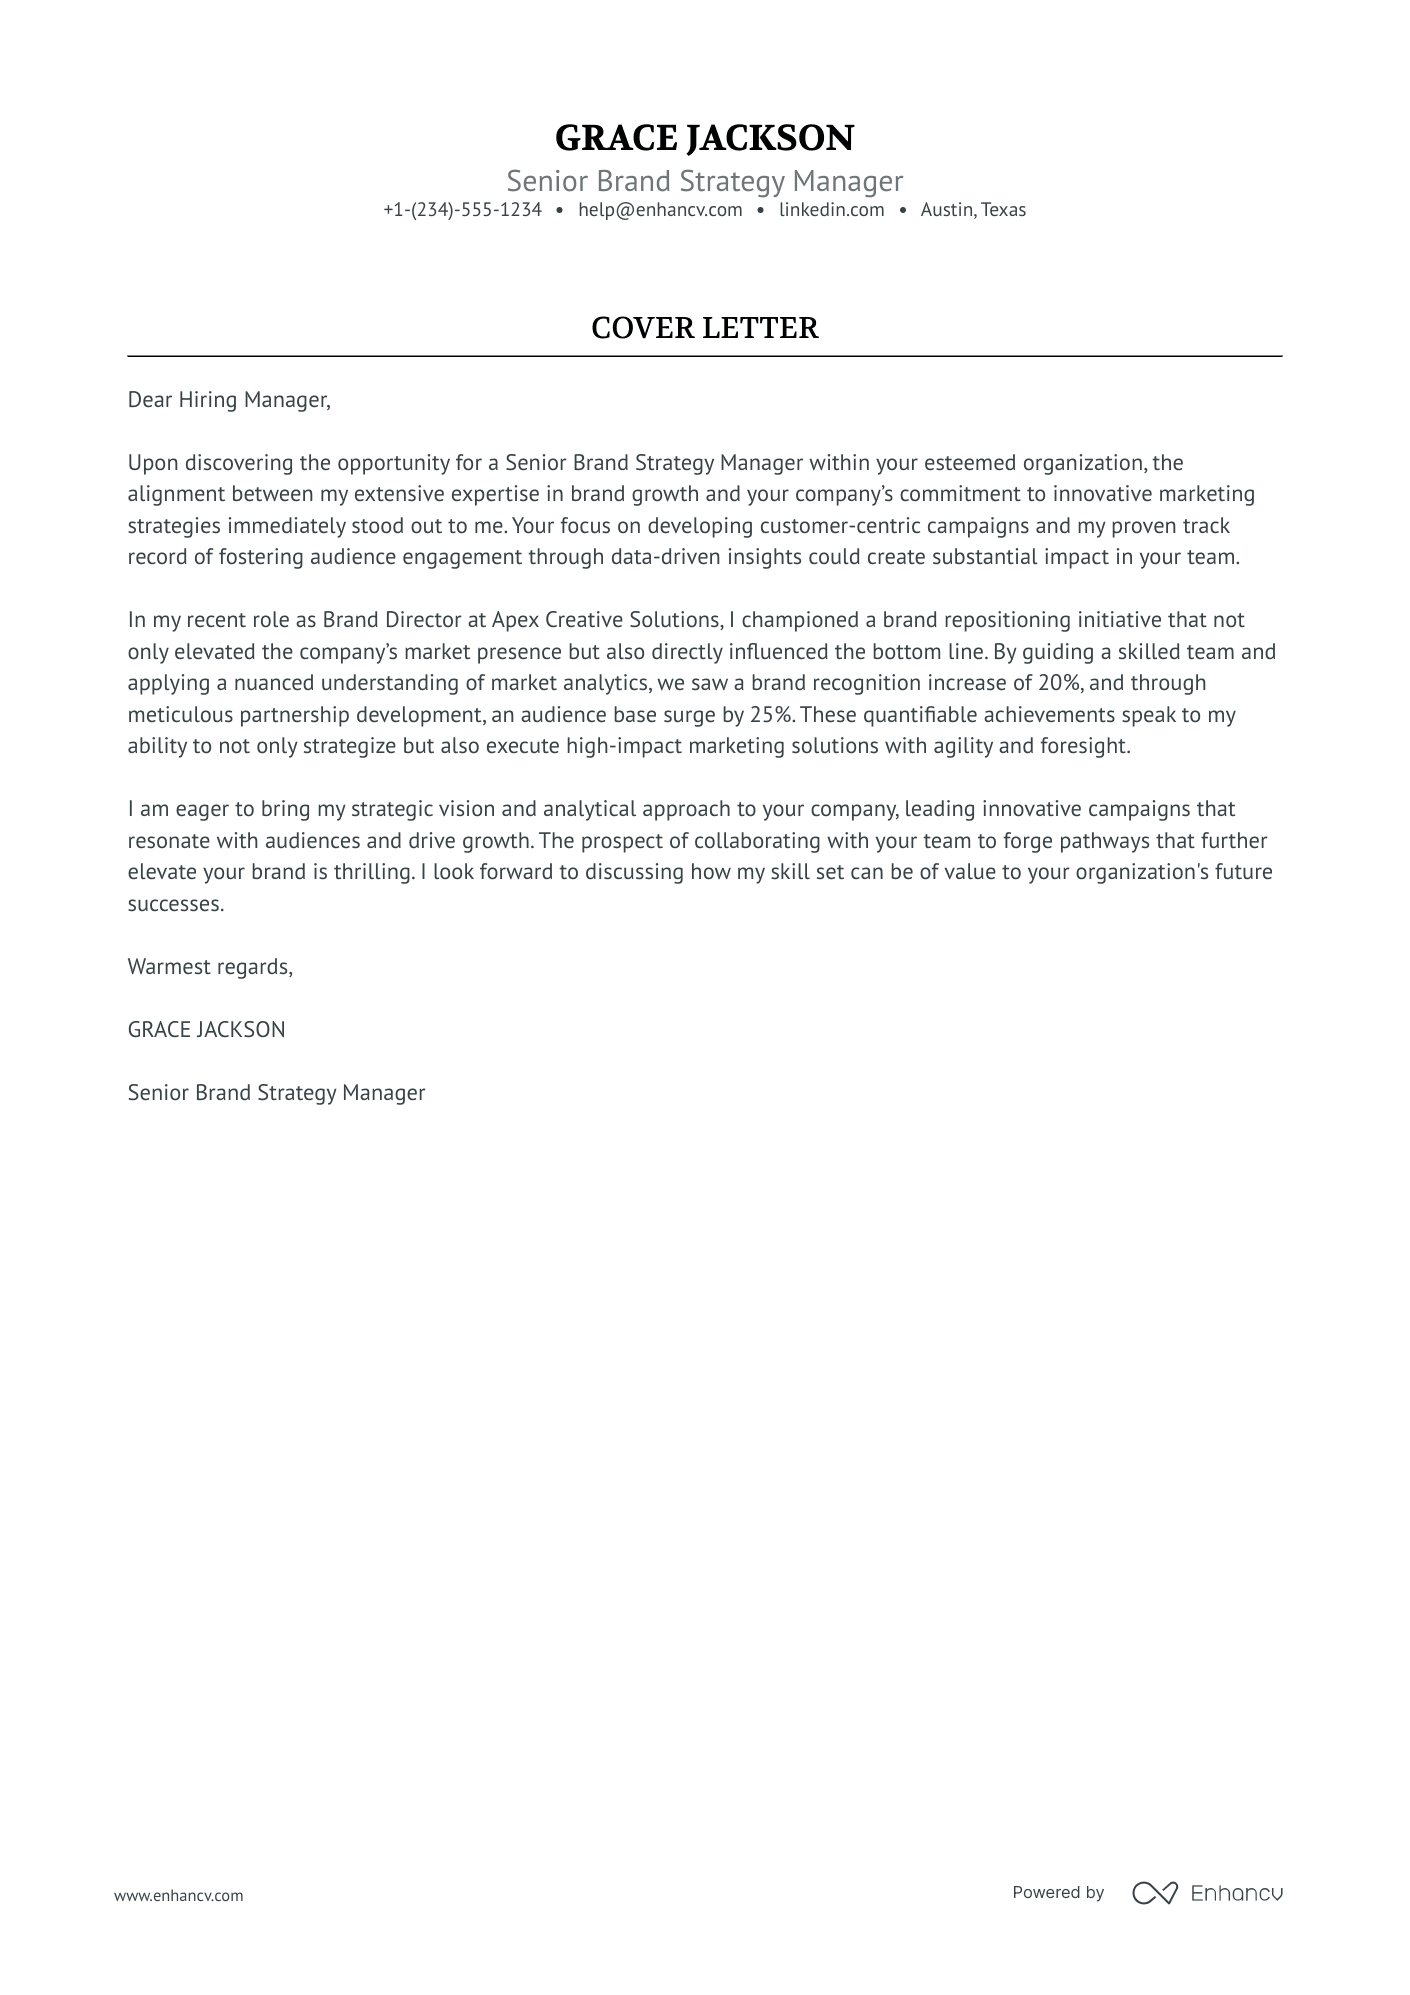 Strategy Manager cover letter